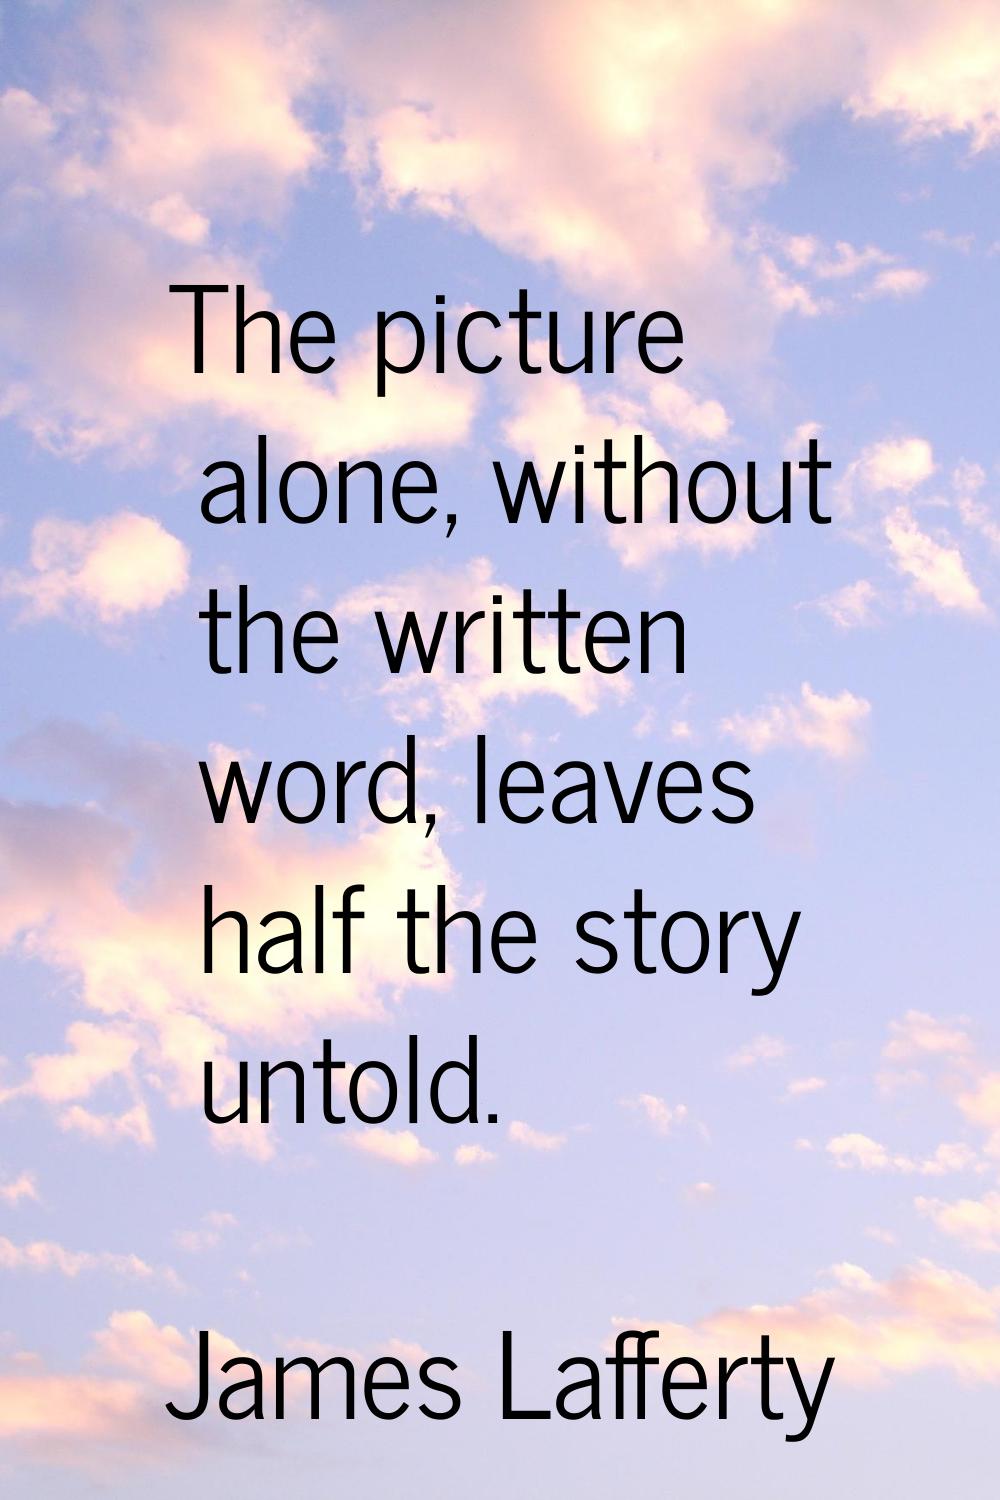 The picture alone, without the written word, leaves half the story untold.